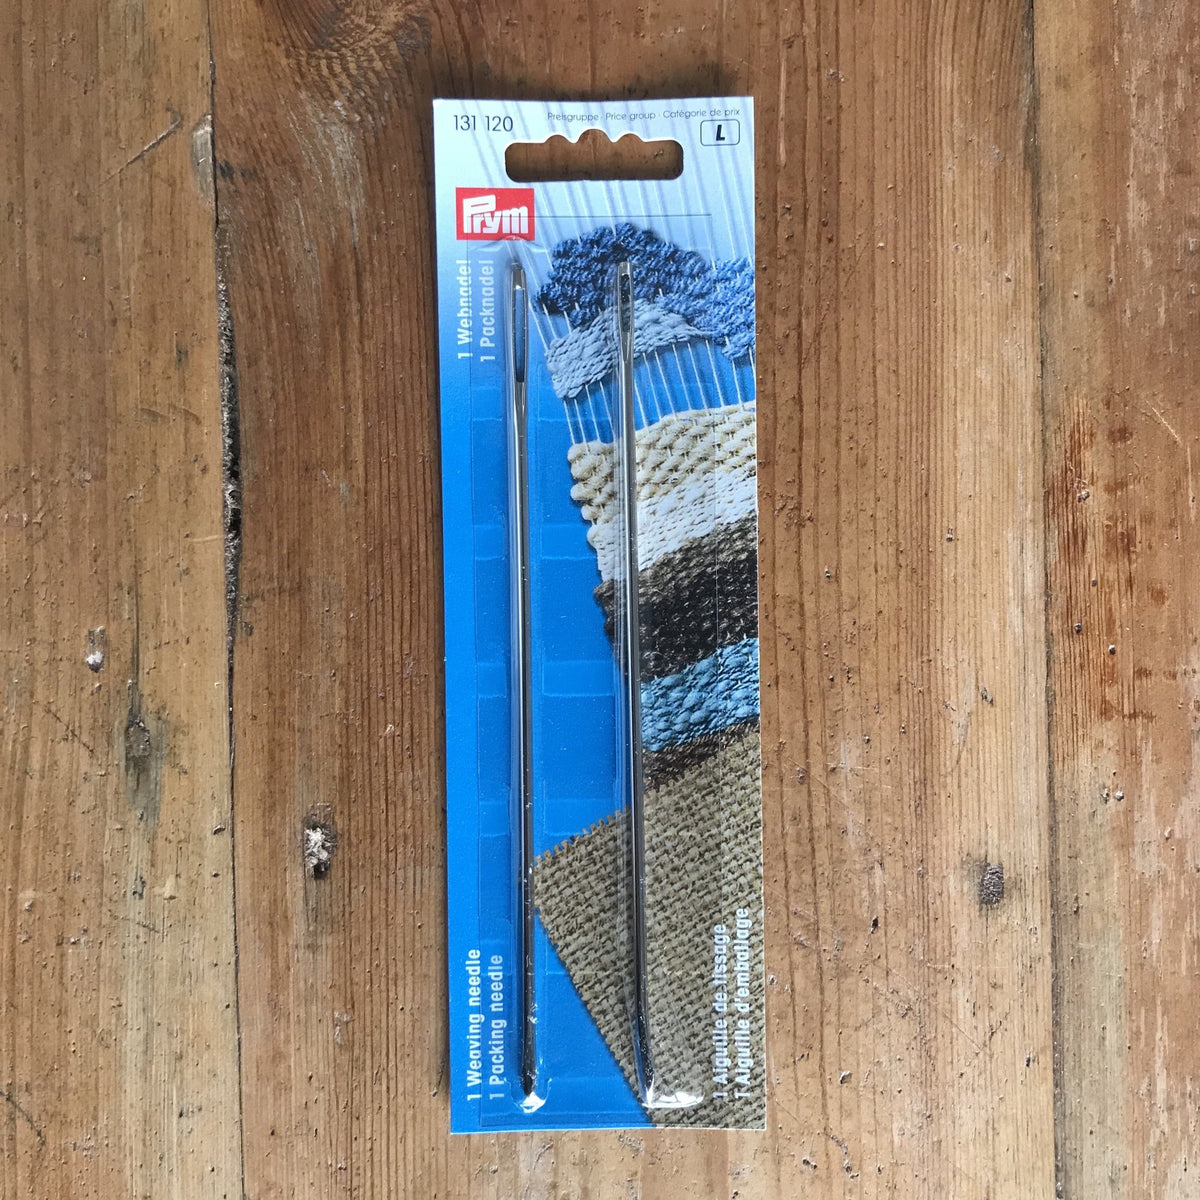 PRYM Weaving and Packing Needles